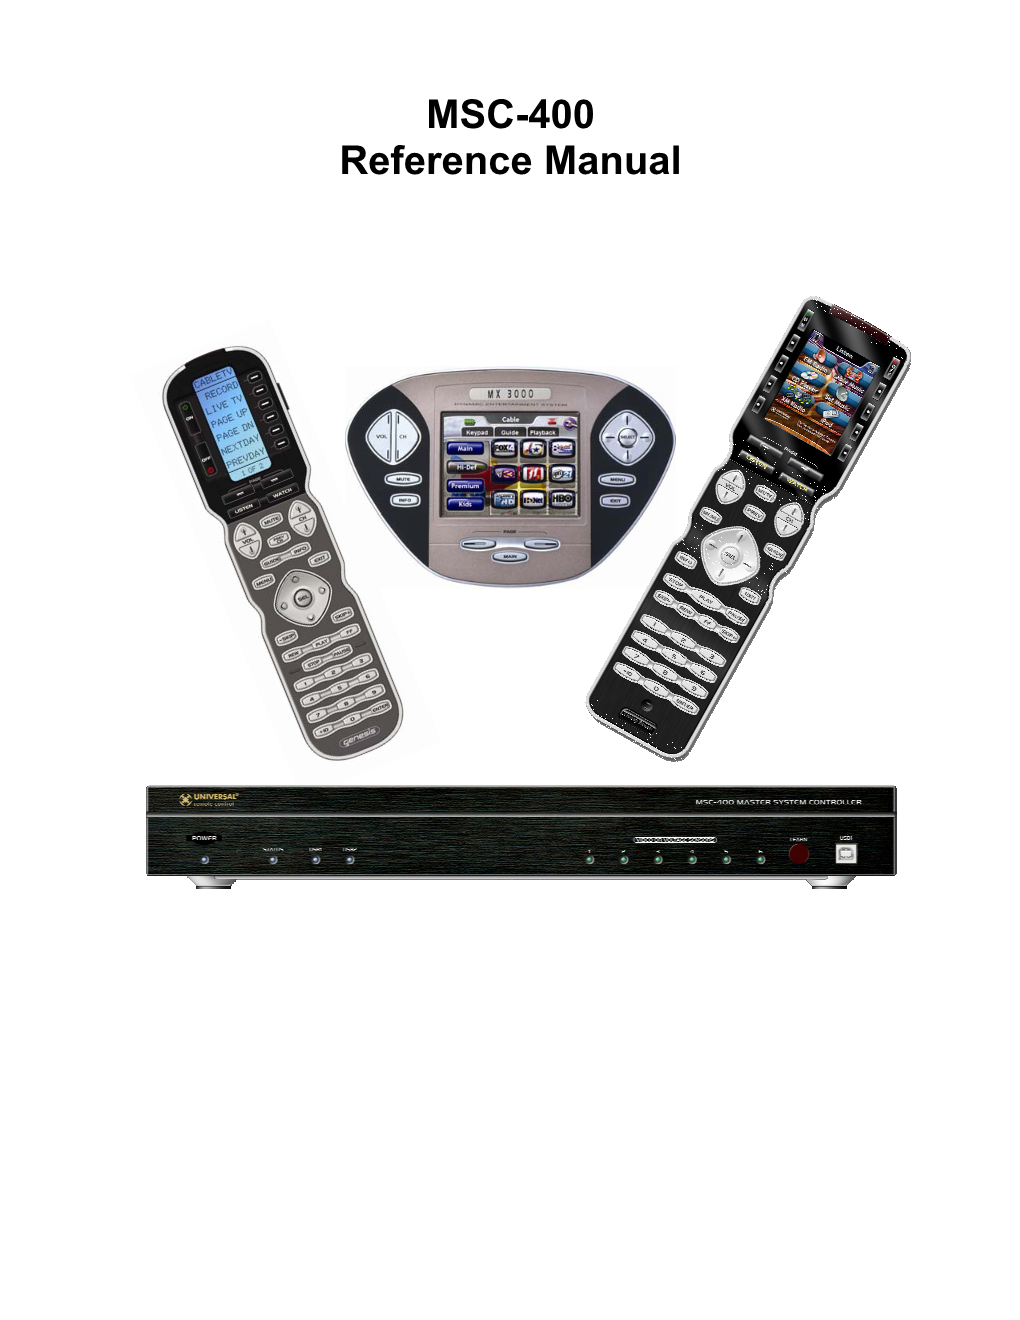 MSC-400 Reference Manual